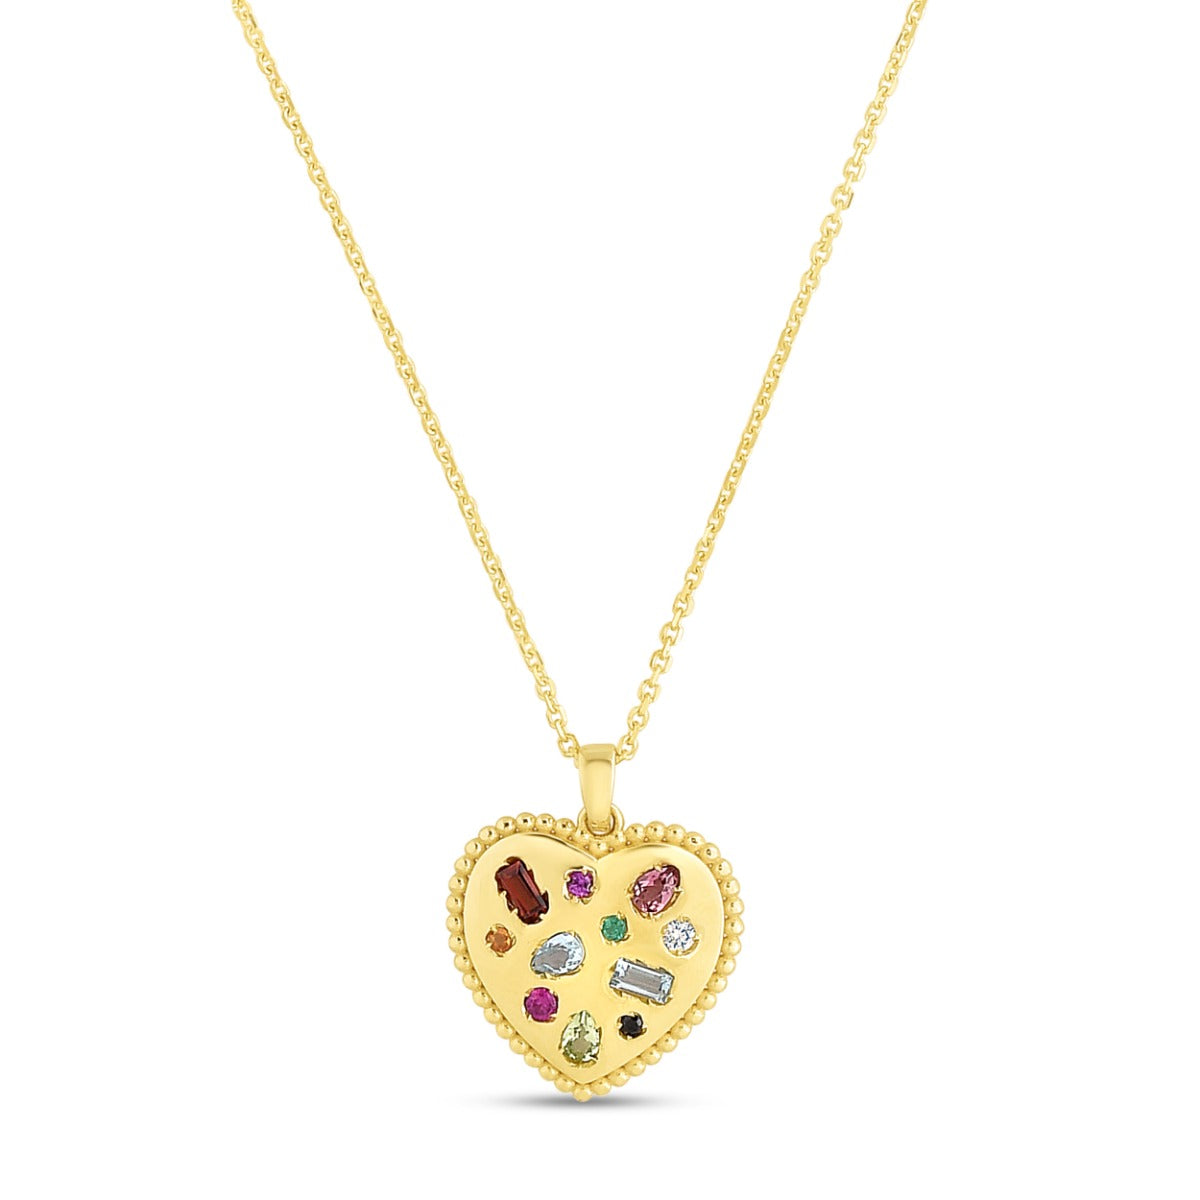 Gemstone Inlay and 14K Gold Yellow Polished Heart Beaded Pendant Chain Necklace with Lobster Clasp